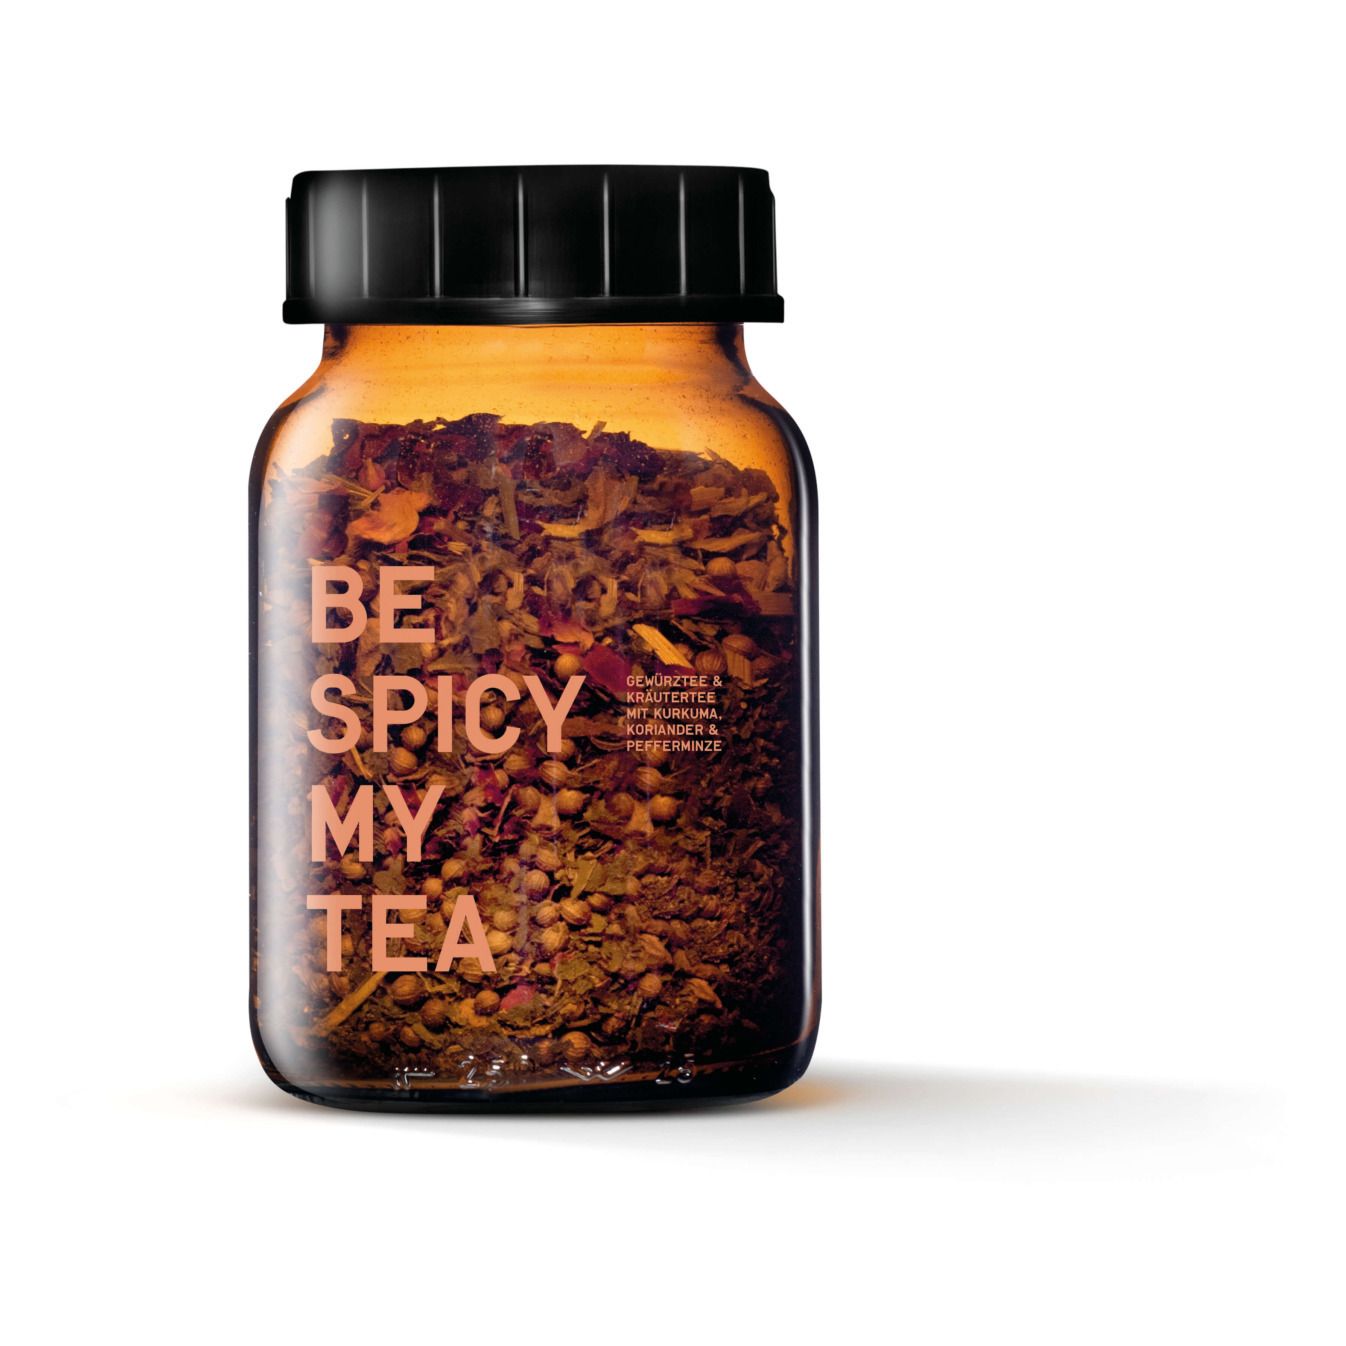 BE [...] MY FRIEND - Thé Be Spicy - 120 g - Transparent